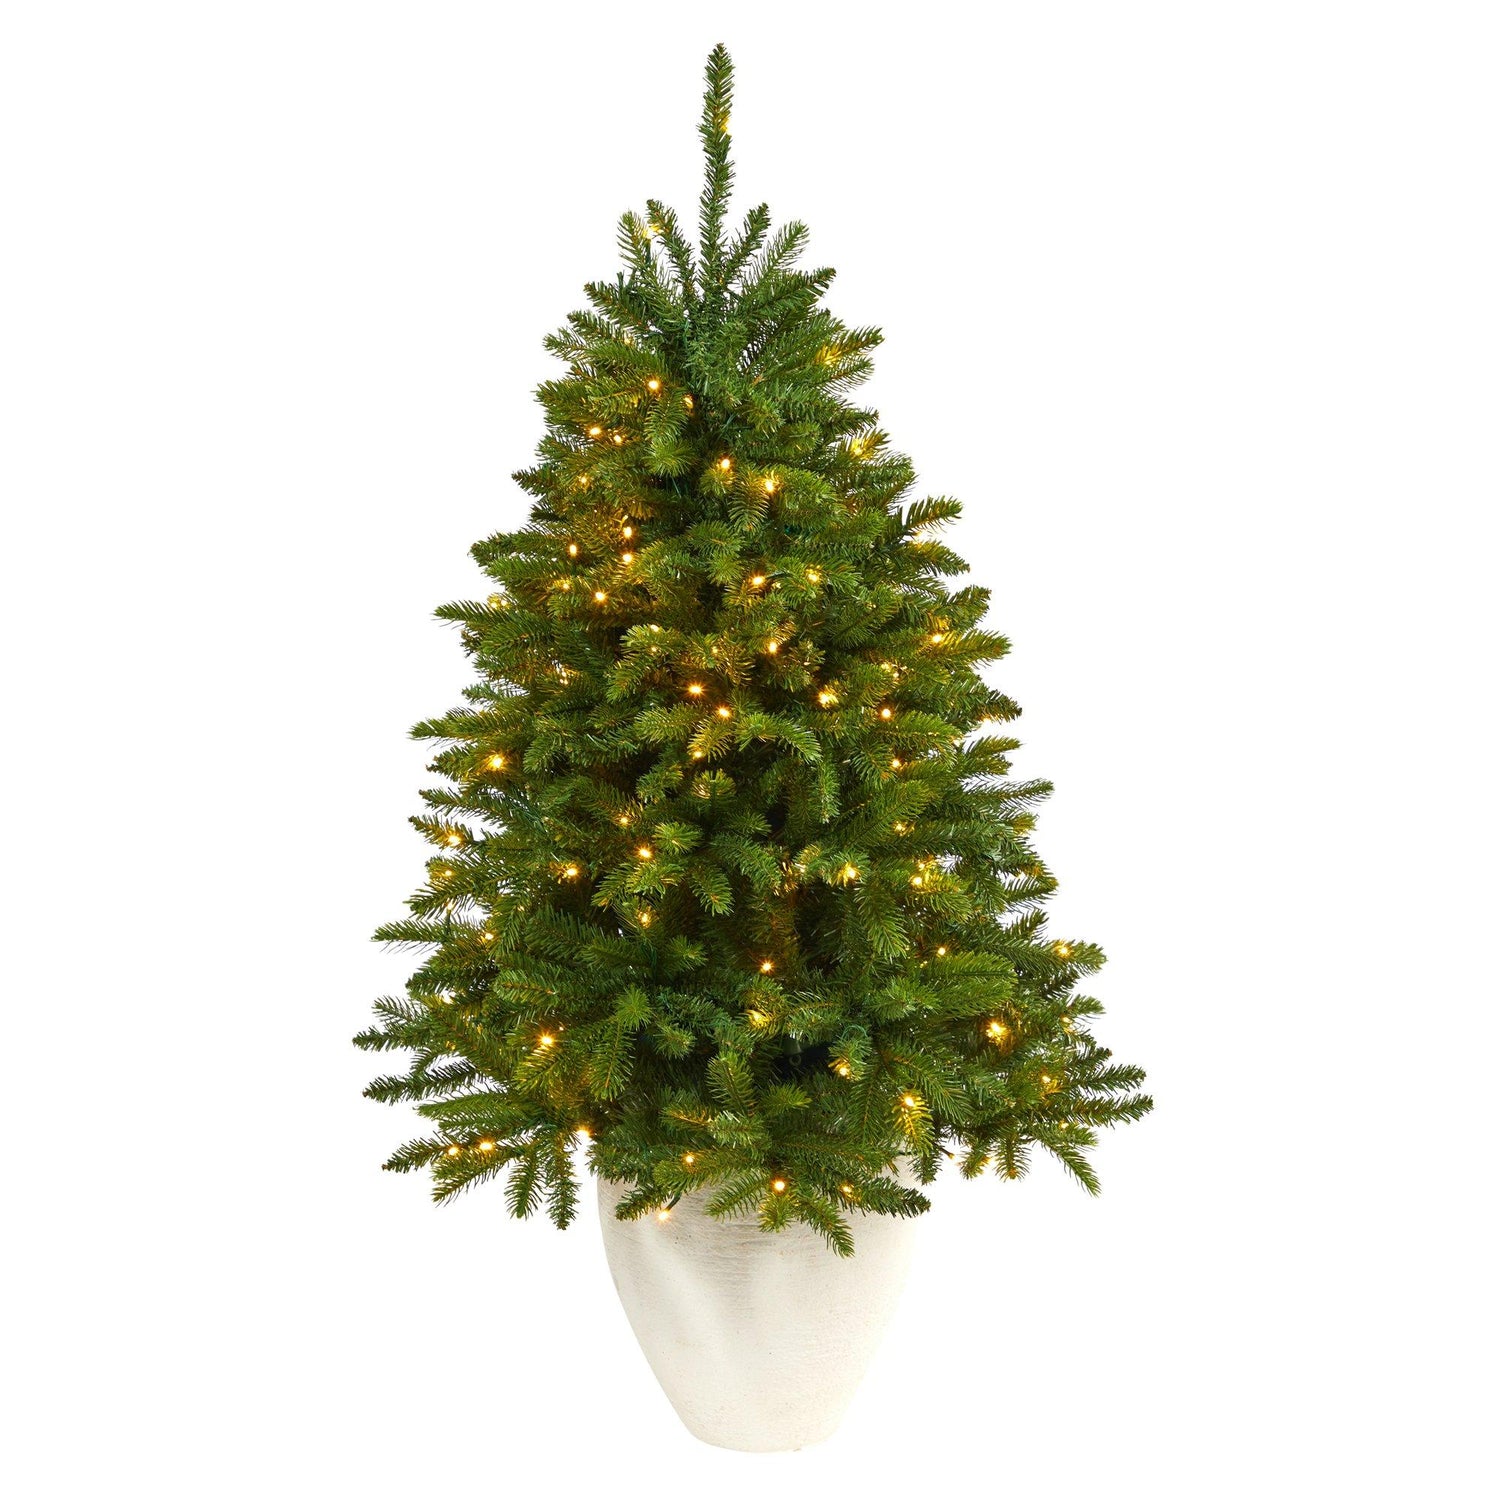 50” Sierra Spruce “Natural Look” Artificial Christmas Tree with 150 Clear LED Lights in White Planter